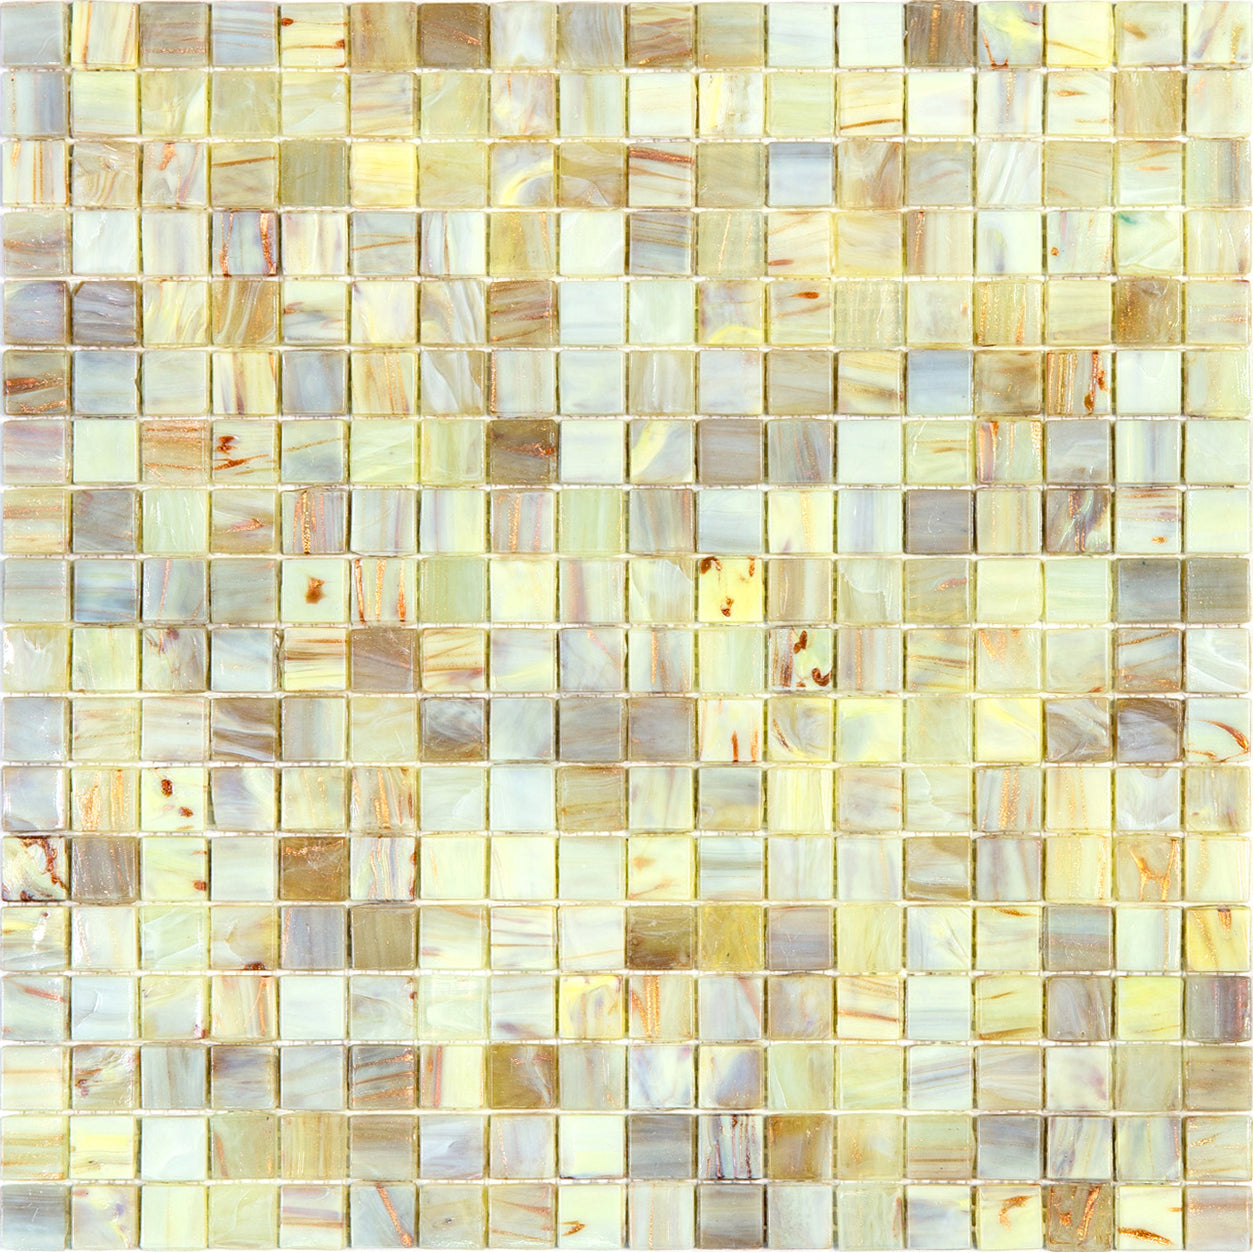 mir alma solid colors 0_6 inch nibble mn388 wall and floor mosaic distributed by surface group natural materials